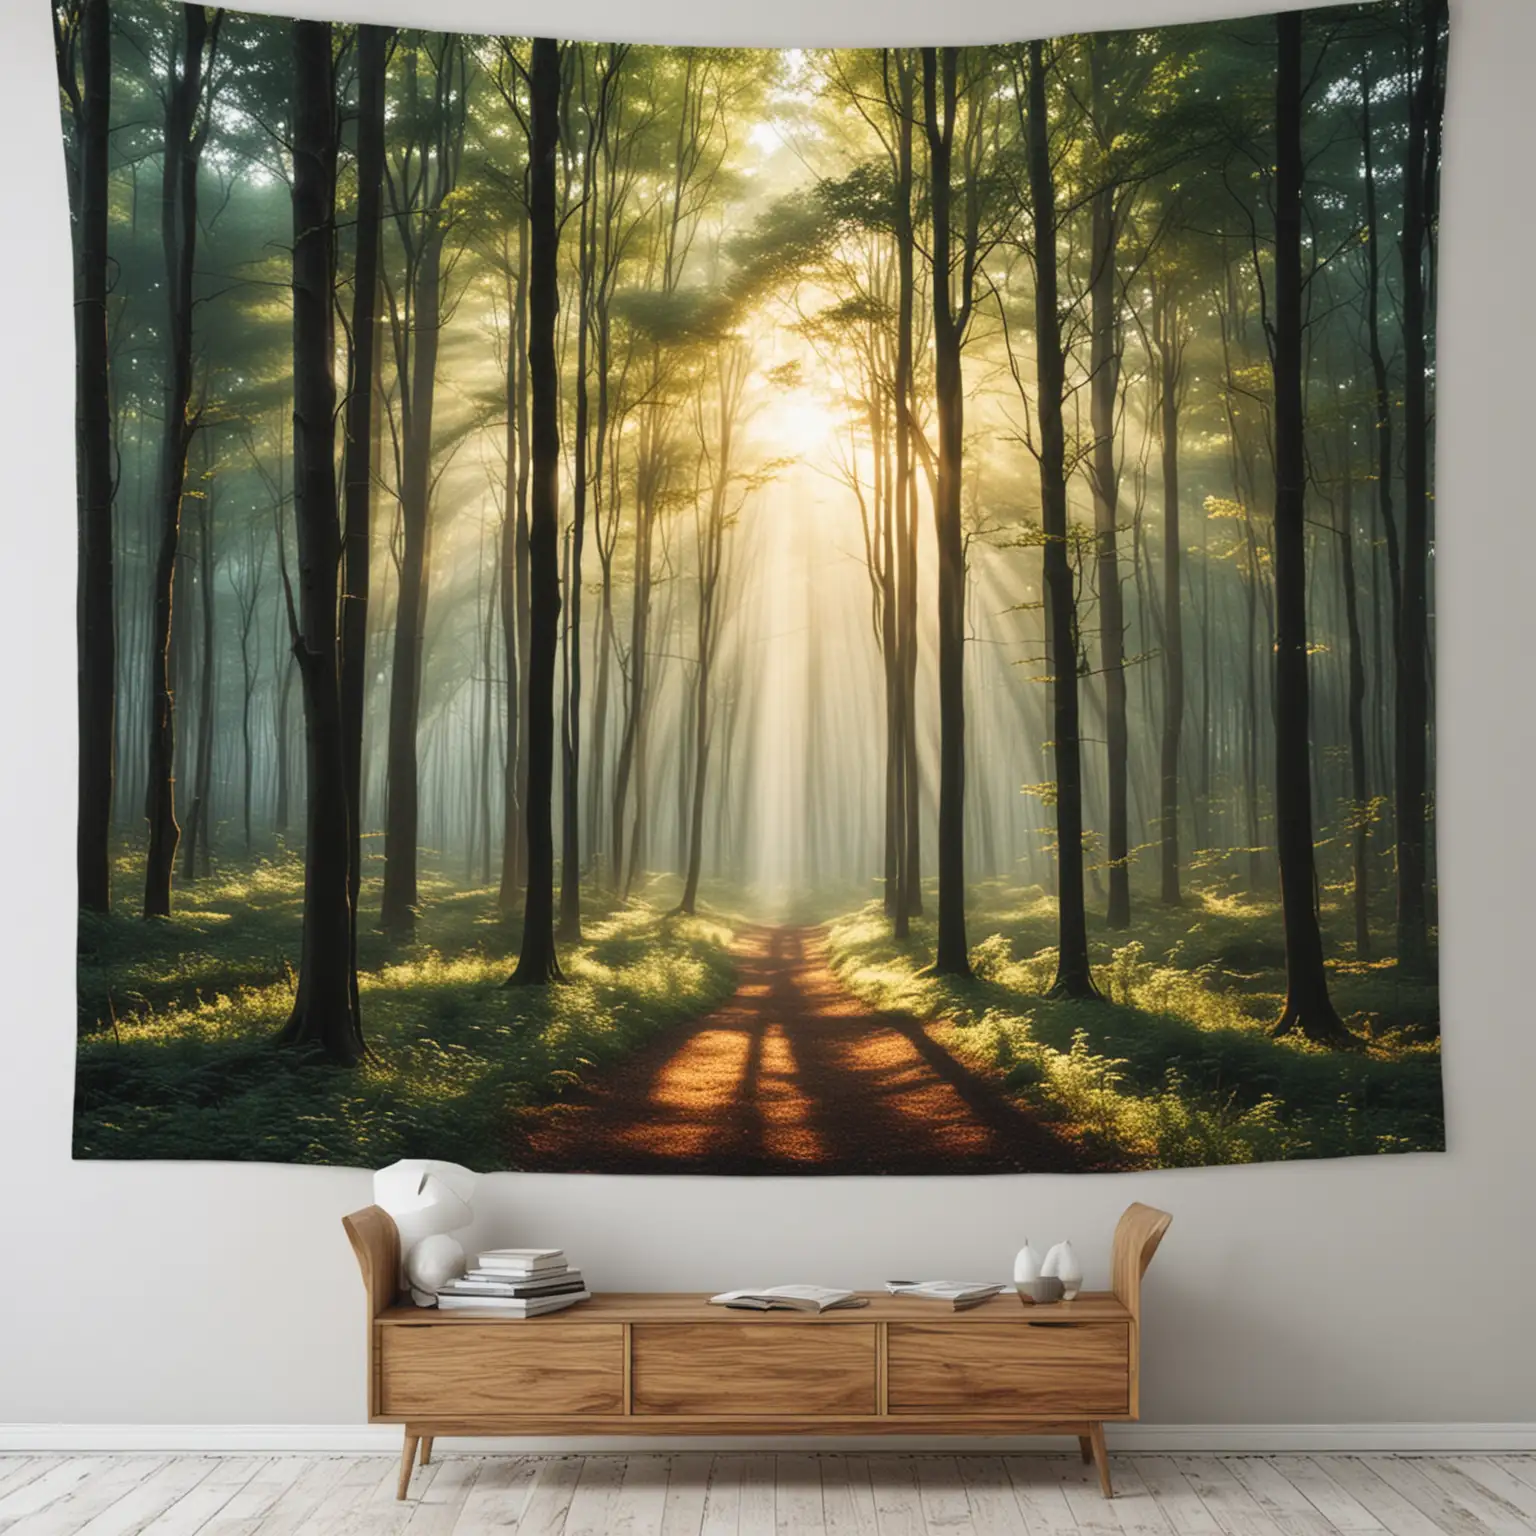 gorgeous forest with light shining through. design worthy of a tapestry 